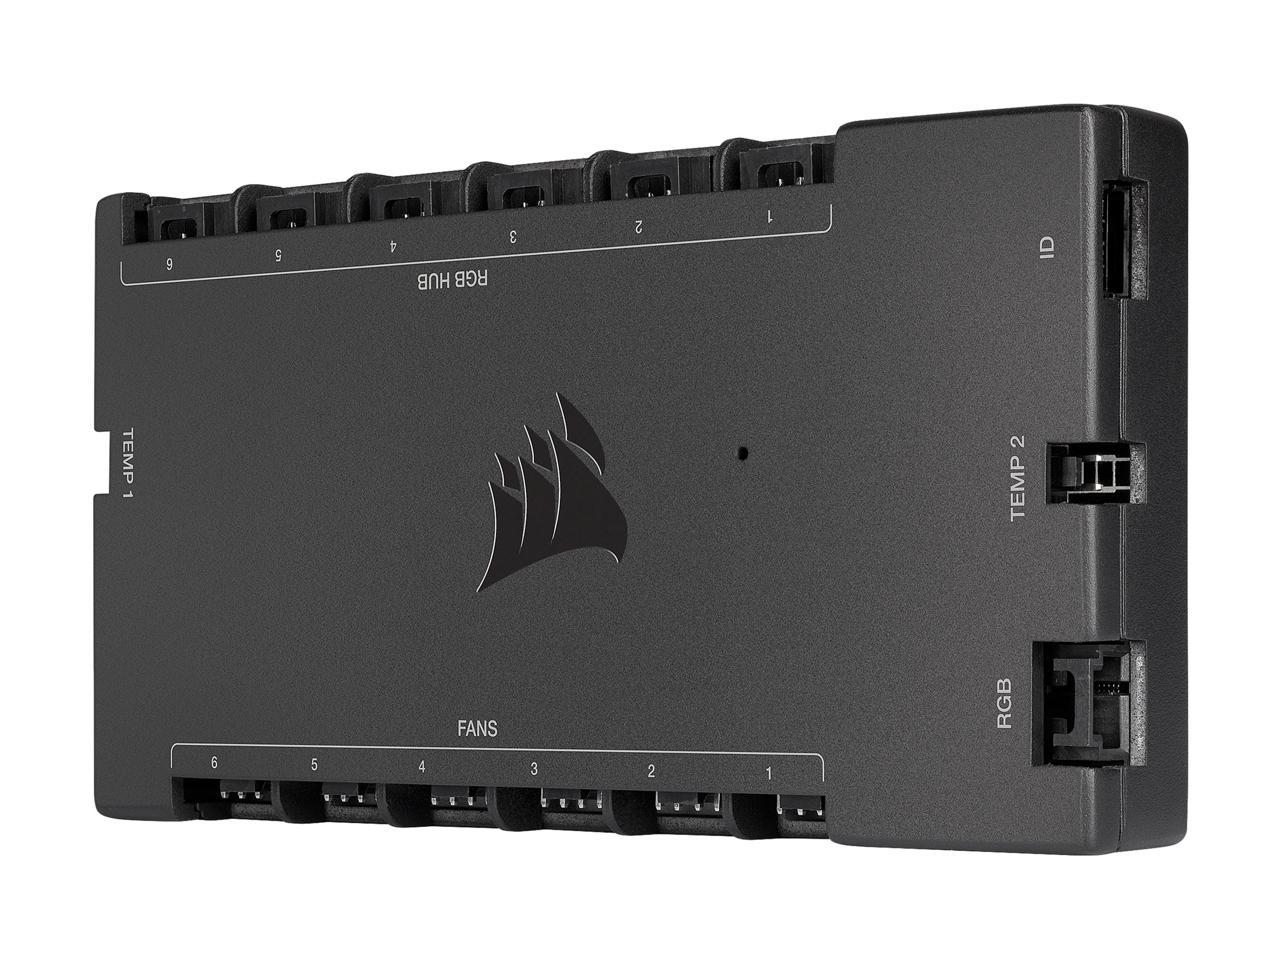 CORSAIR iCUE COMMANDER CORE XT Smart RGB Lighting and Fan Speed Controller - image 2 of 11